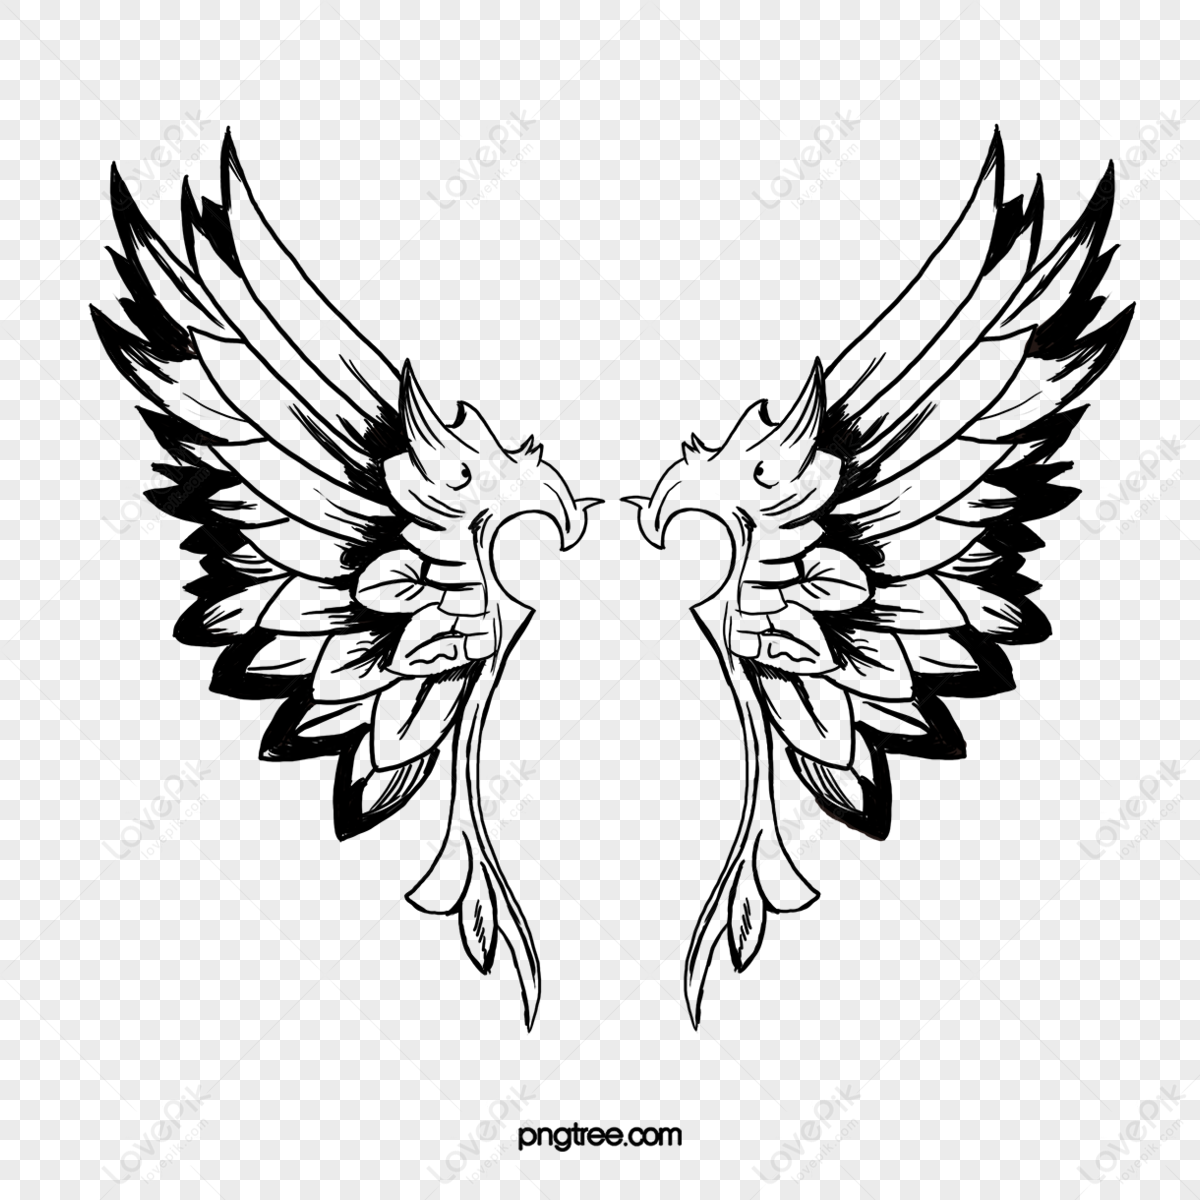 Tattoo Totem Wings Vector Set Free Vector cdr Download - 3axis.co